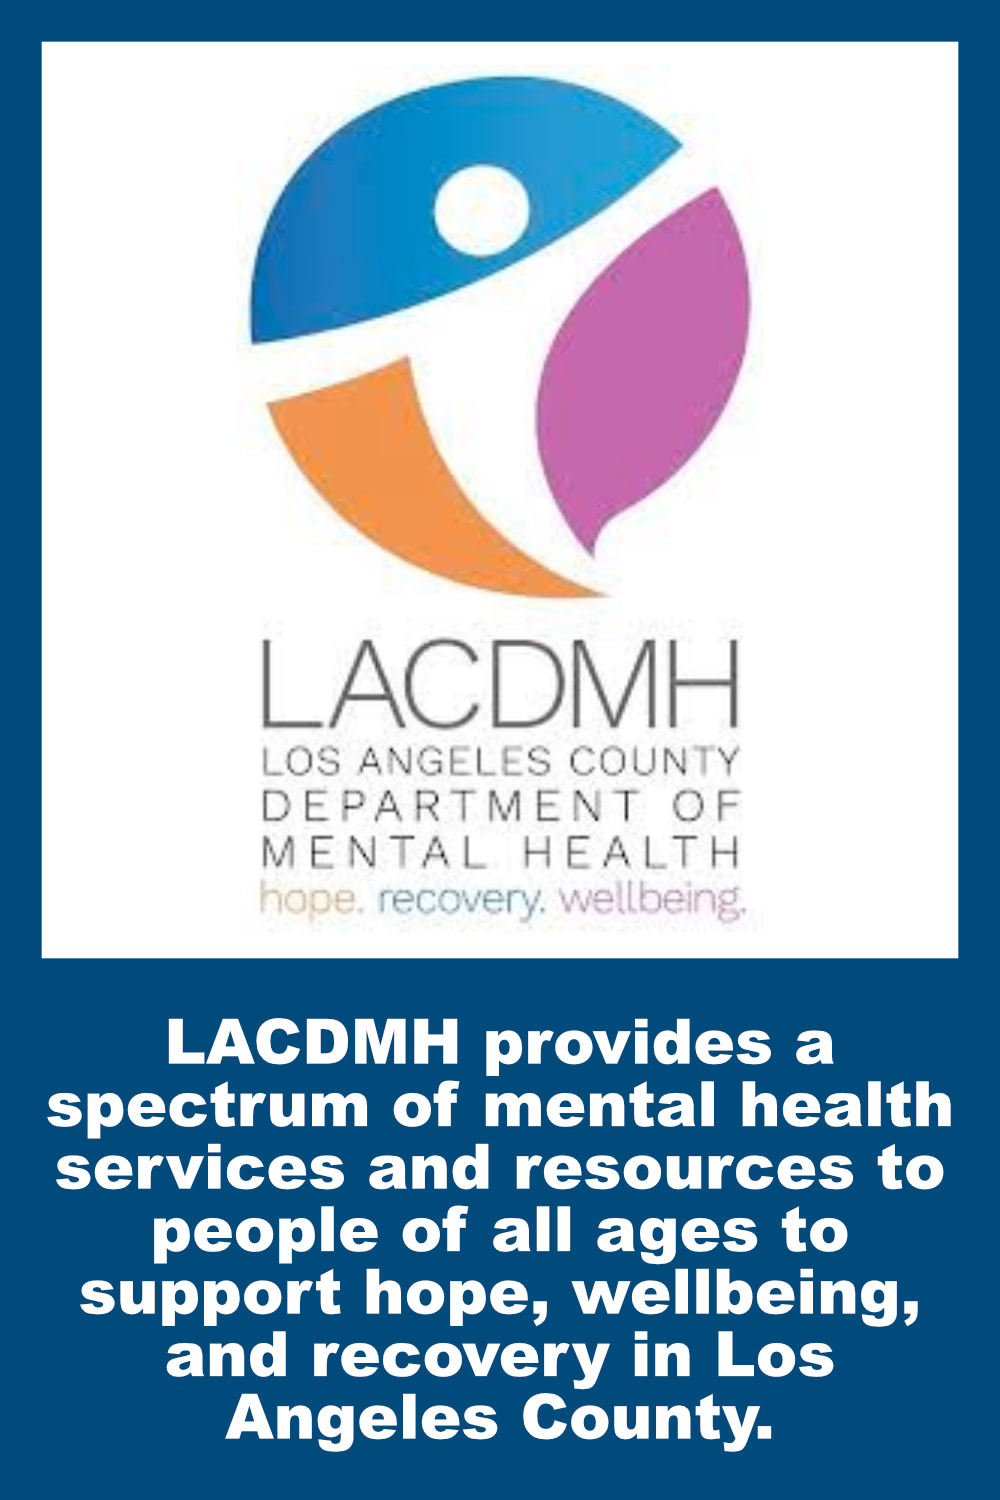 LACDMH provides a spectrum of mental health services and resources to people of all ages to support hope, wellbeing, and recovery in Los Angeles County.